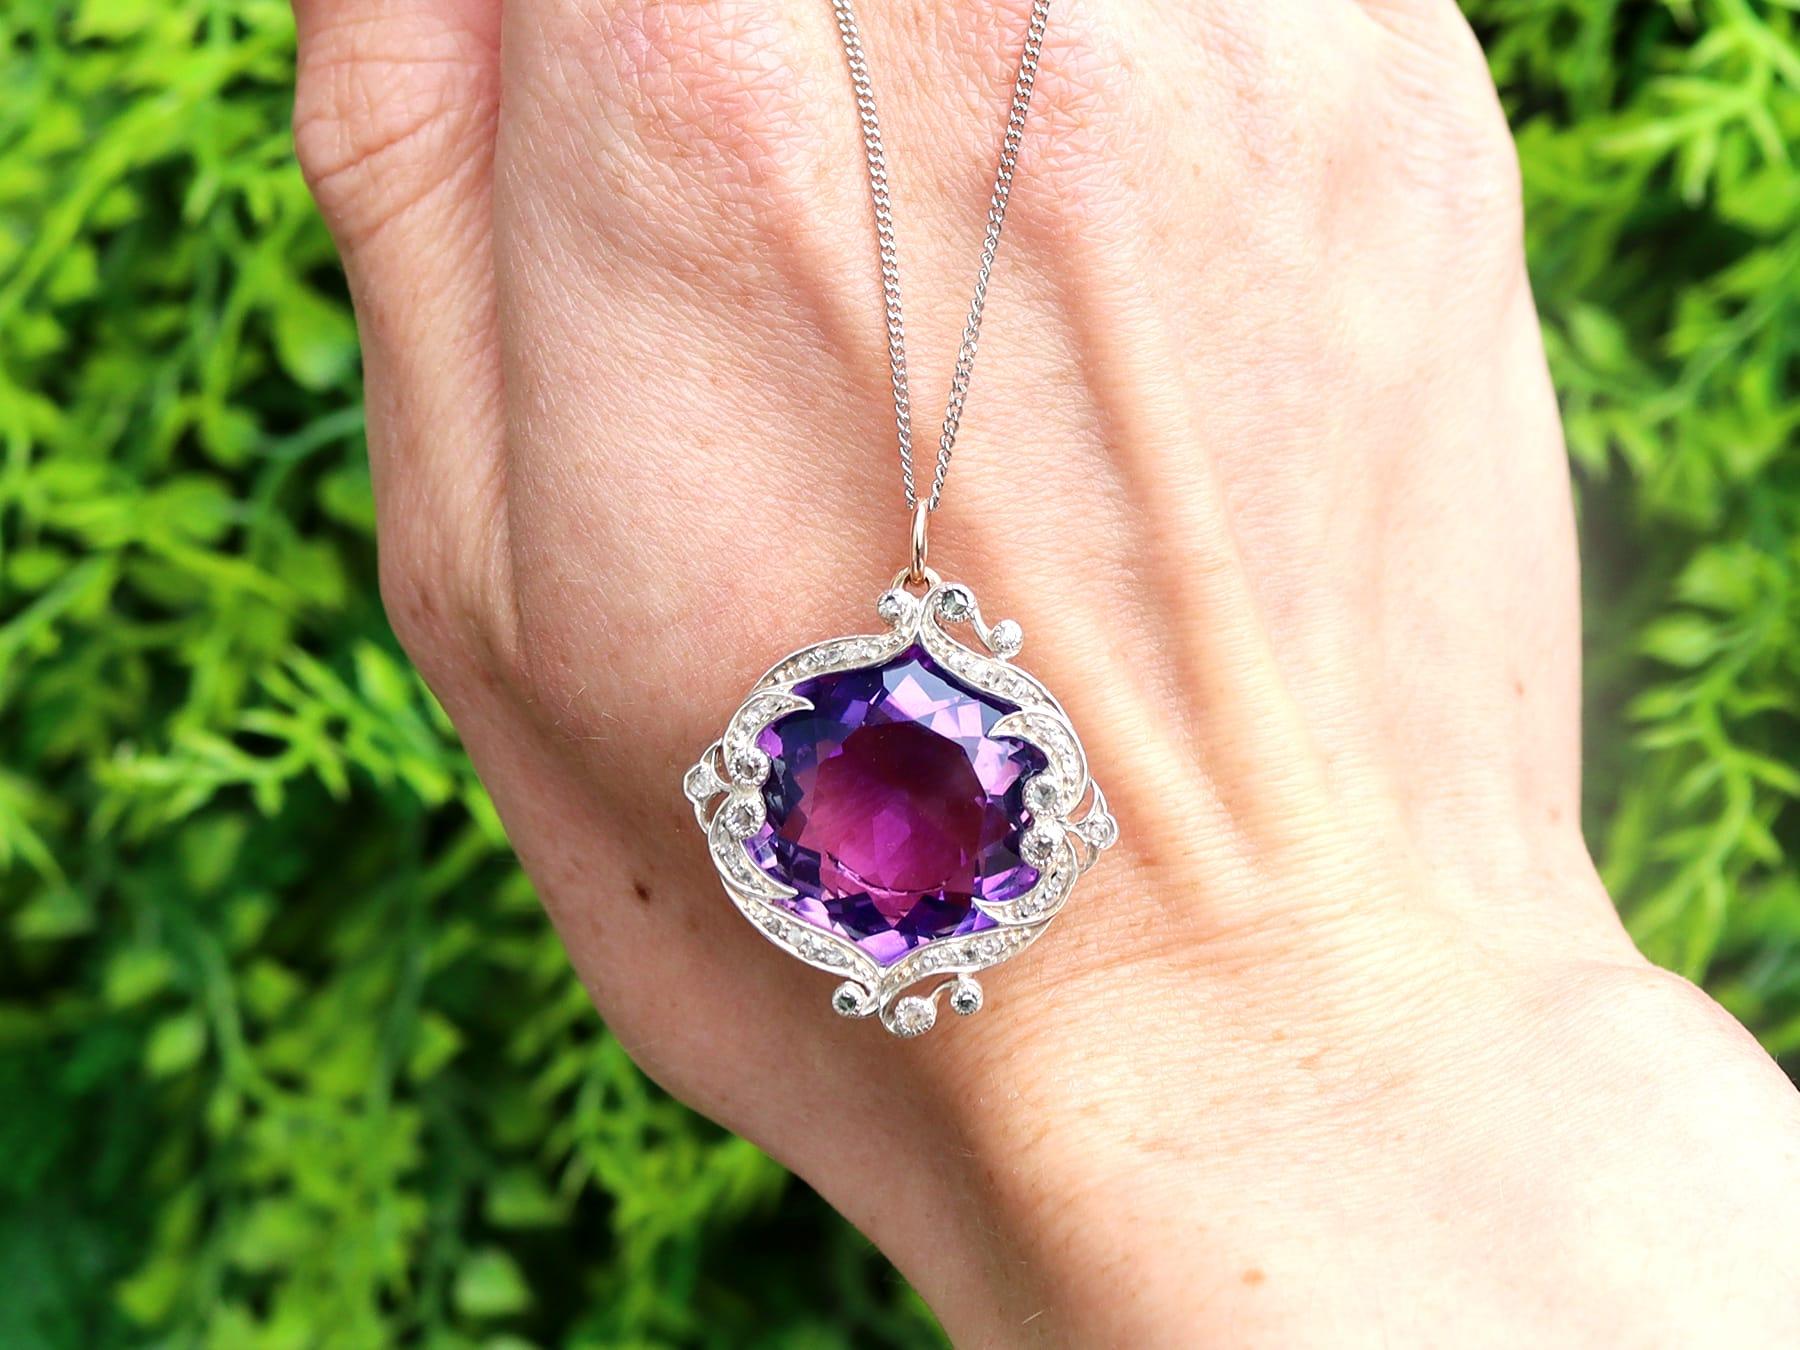 This stunning, fine and impressive amethyst pendant has been crafted in 9k yellow gold with a silver setting.

The asymmetrical pendant is ornamented with a stunning feature 24.68ct round faceted cut amethyst.

The feature amethyst is encompassed